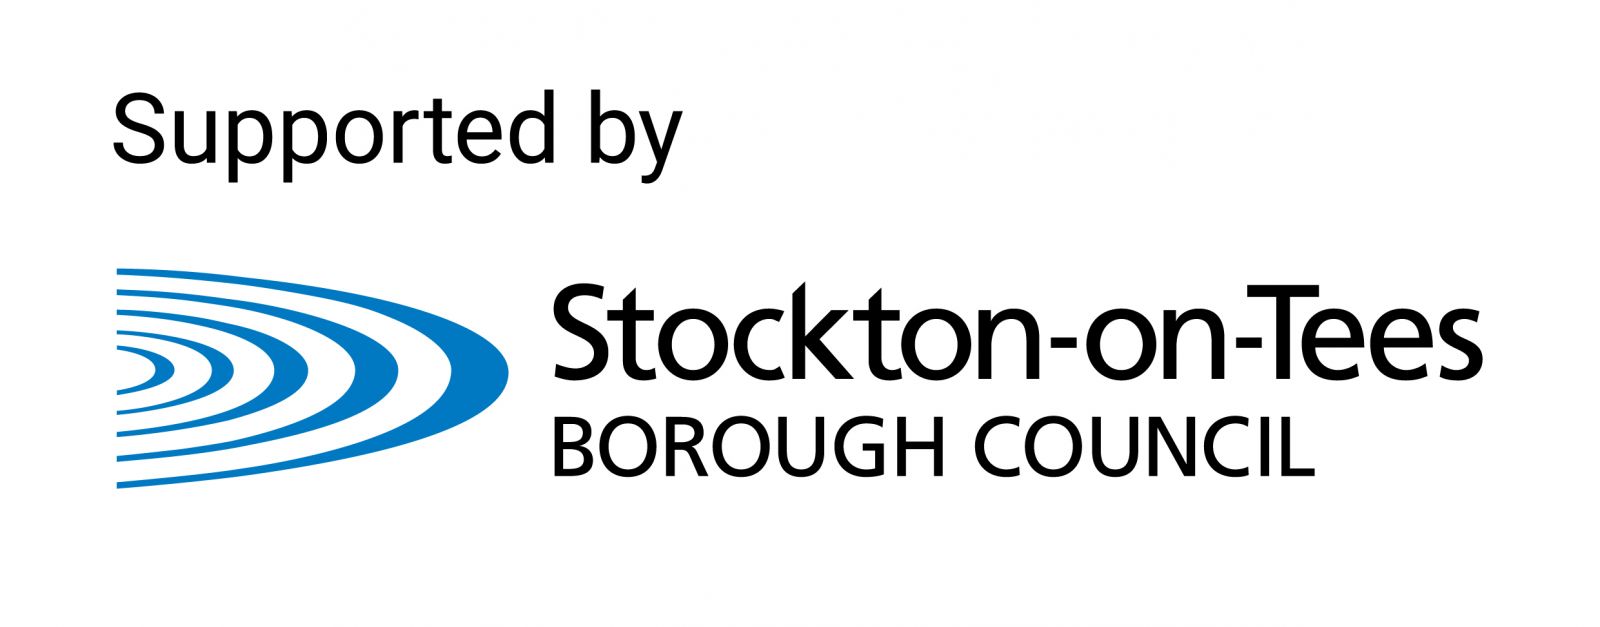 Supported by Stockton-on-Tees Borough Council